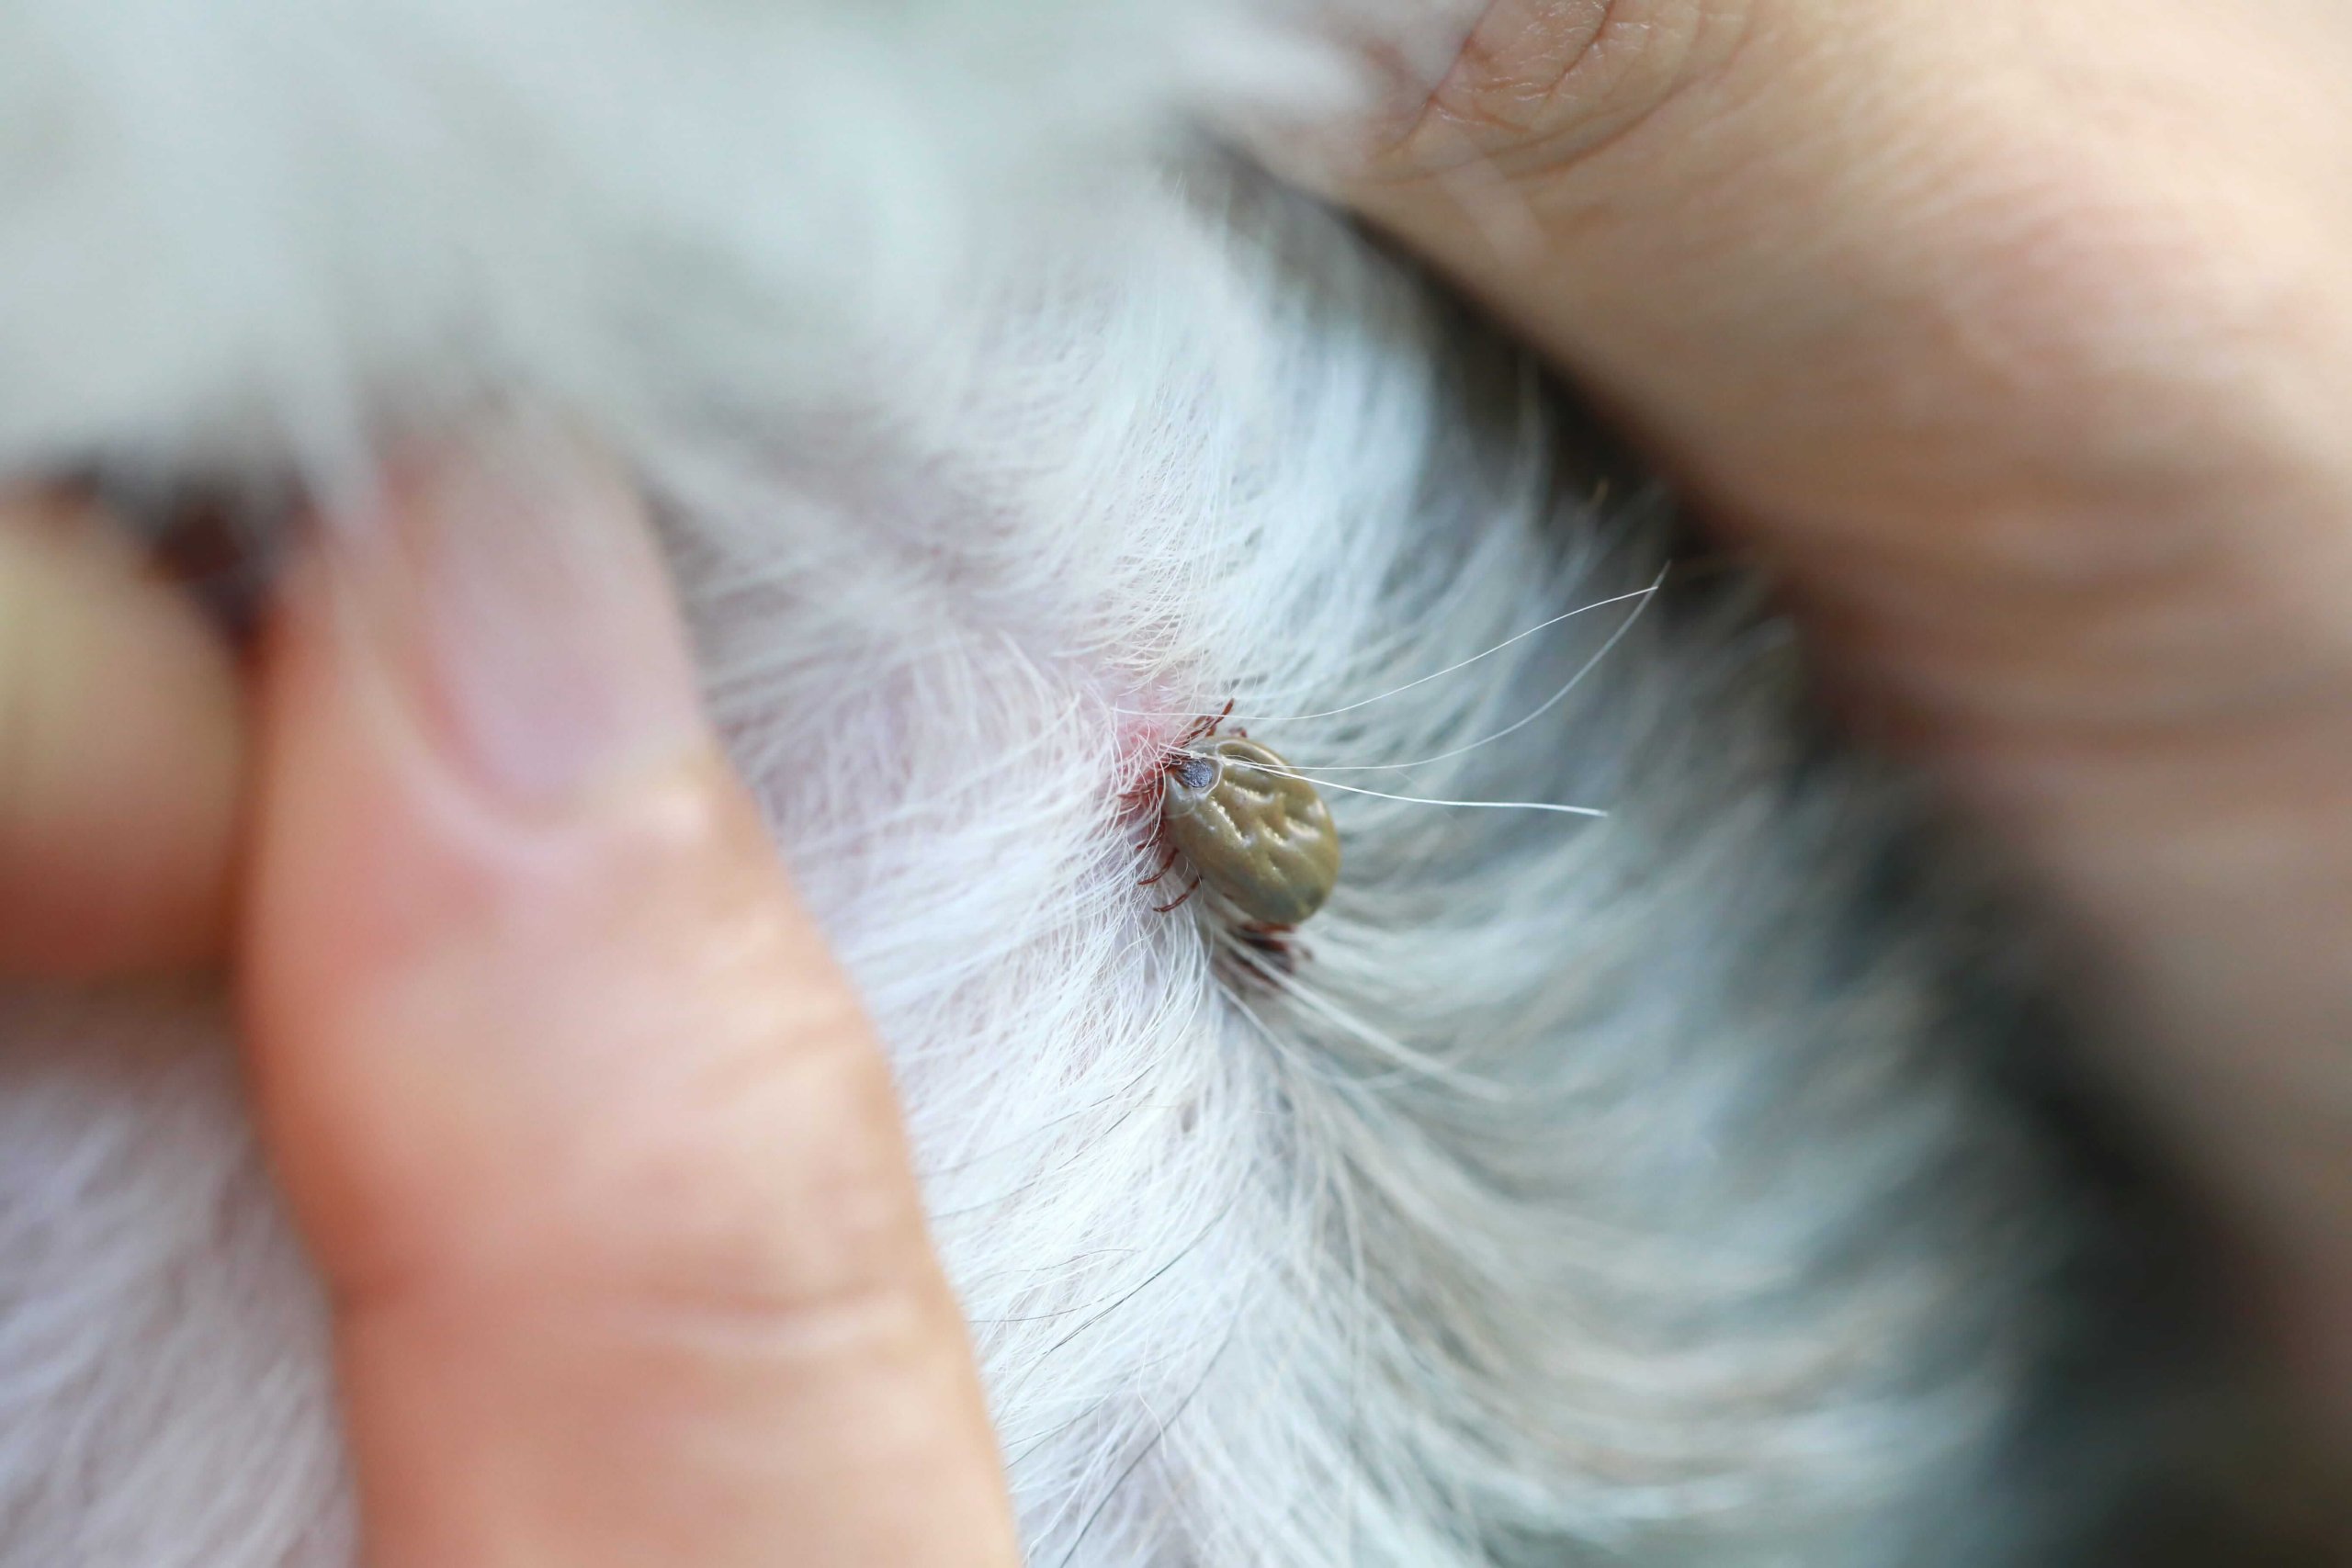 can dog lice go on humans